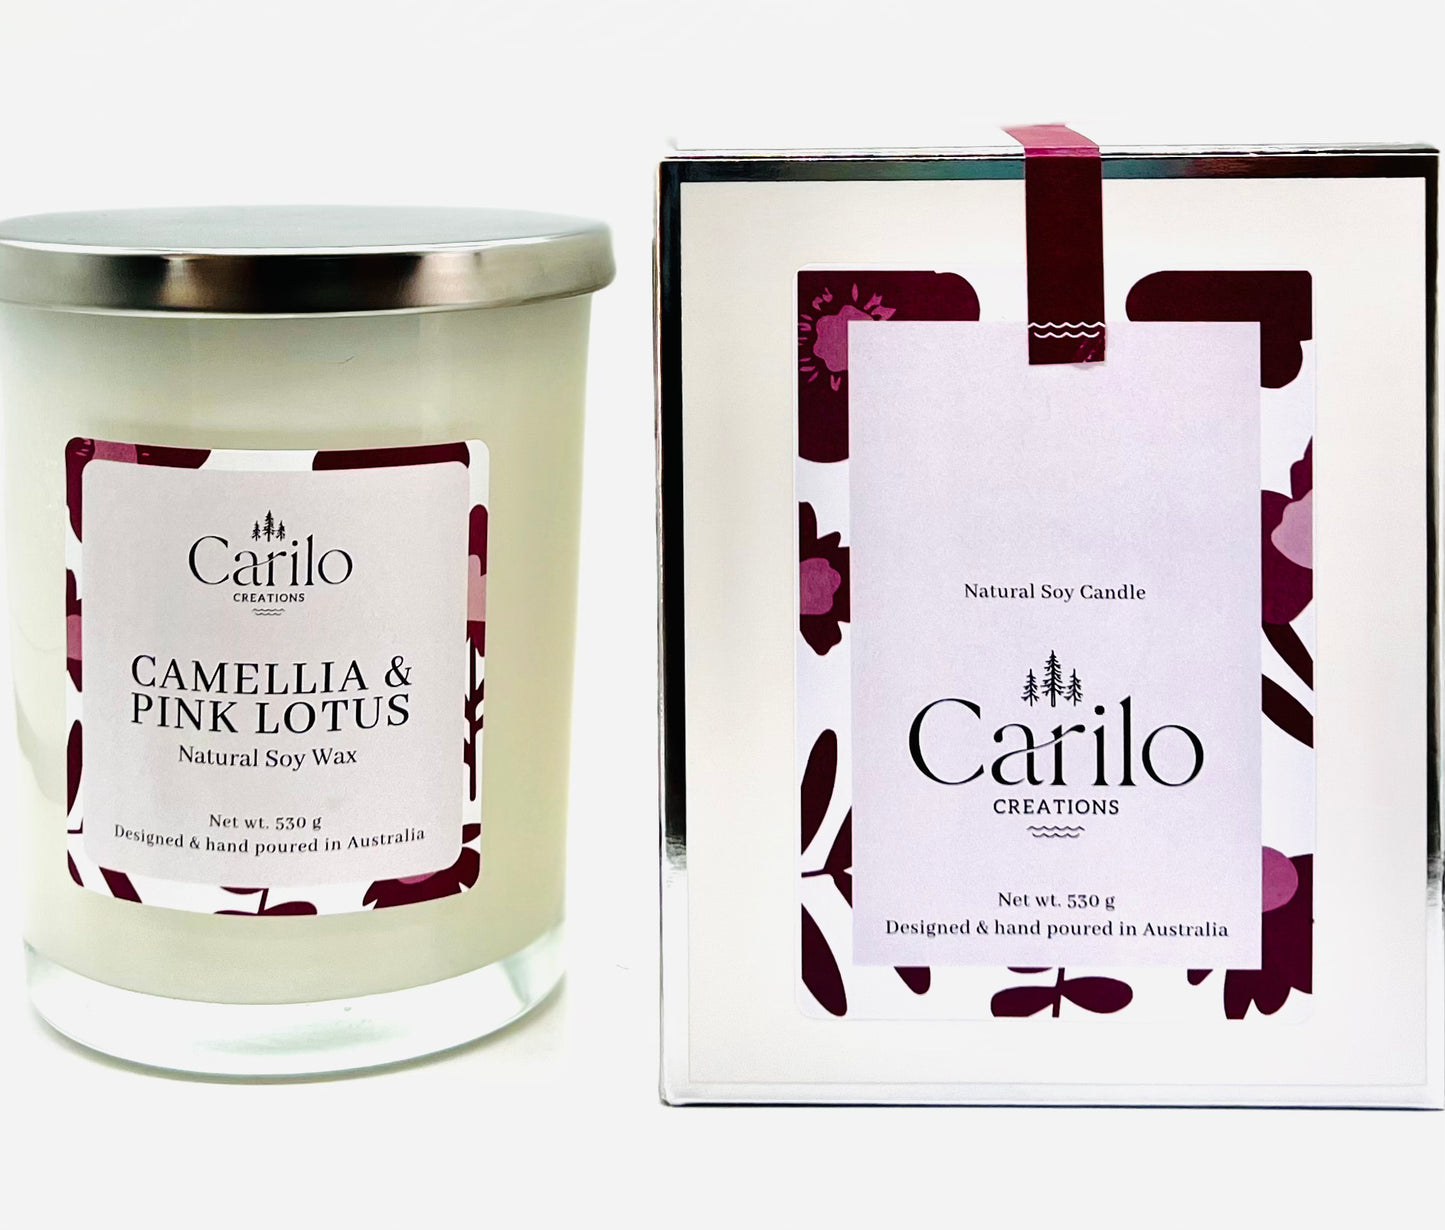 CAMELLIA & PINK LOTUS SCENTED CANDLE - 530g